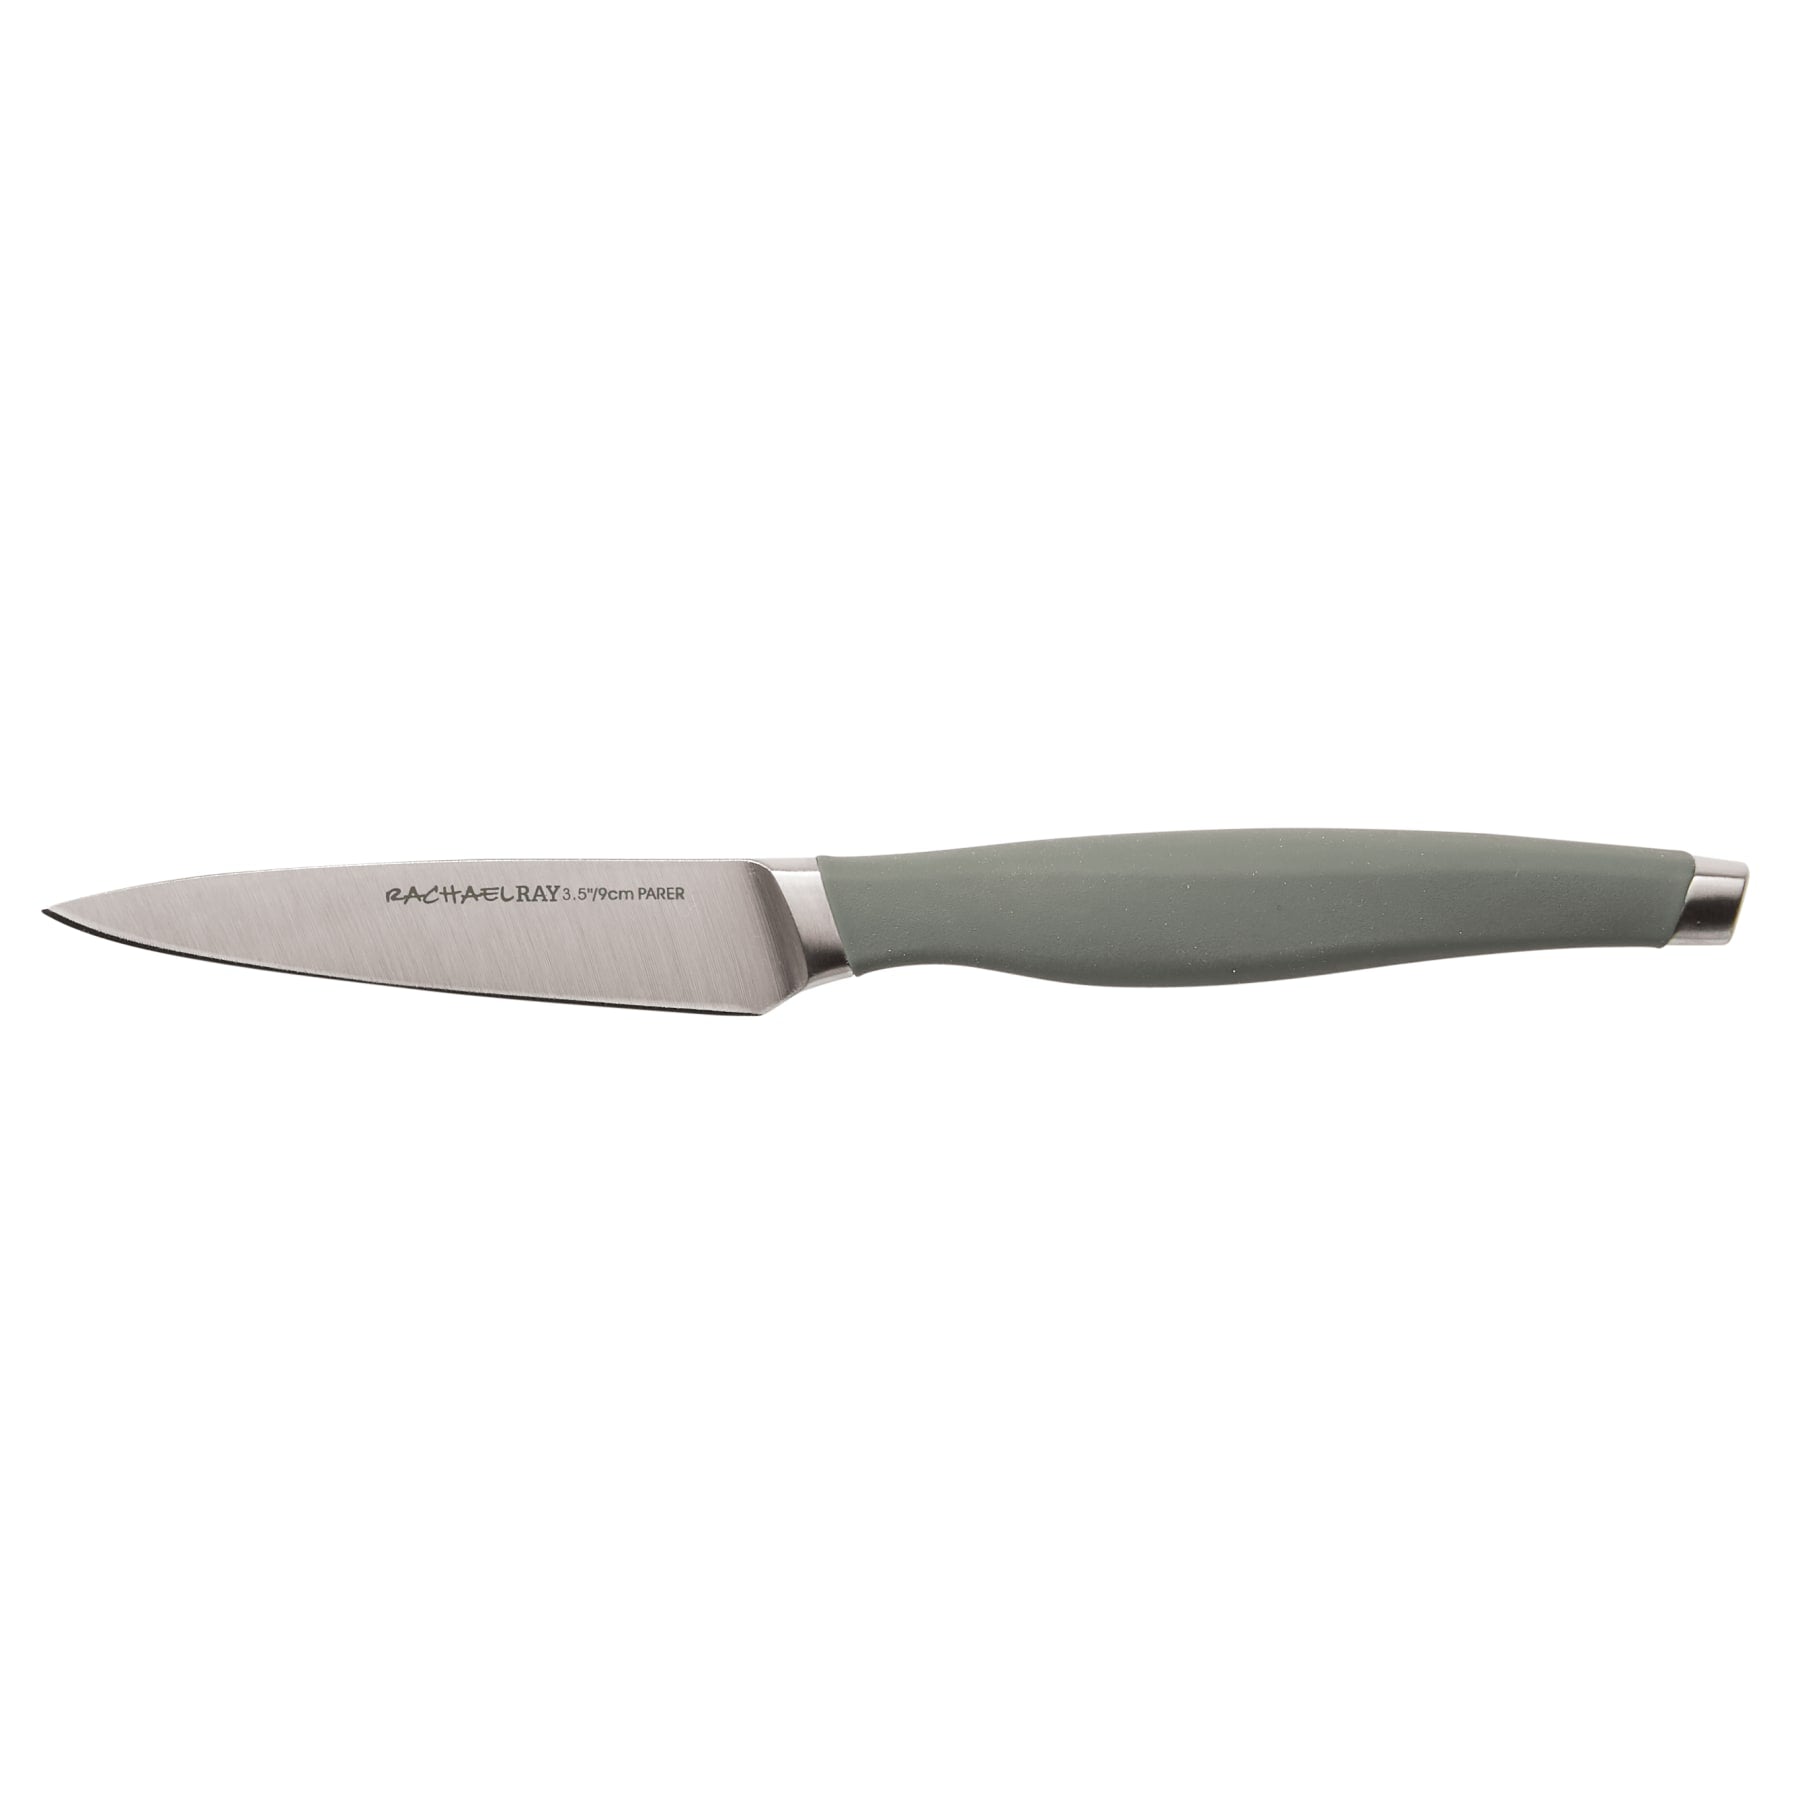 Rachael Ray Cutlery Japanese Stainless Steel Utility Knife 2-Piece